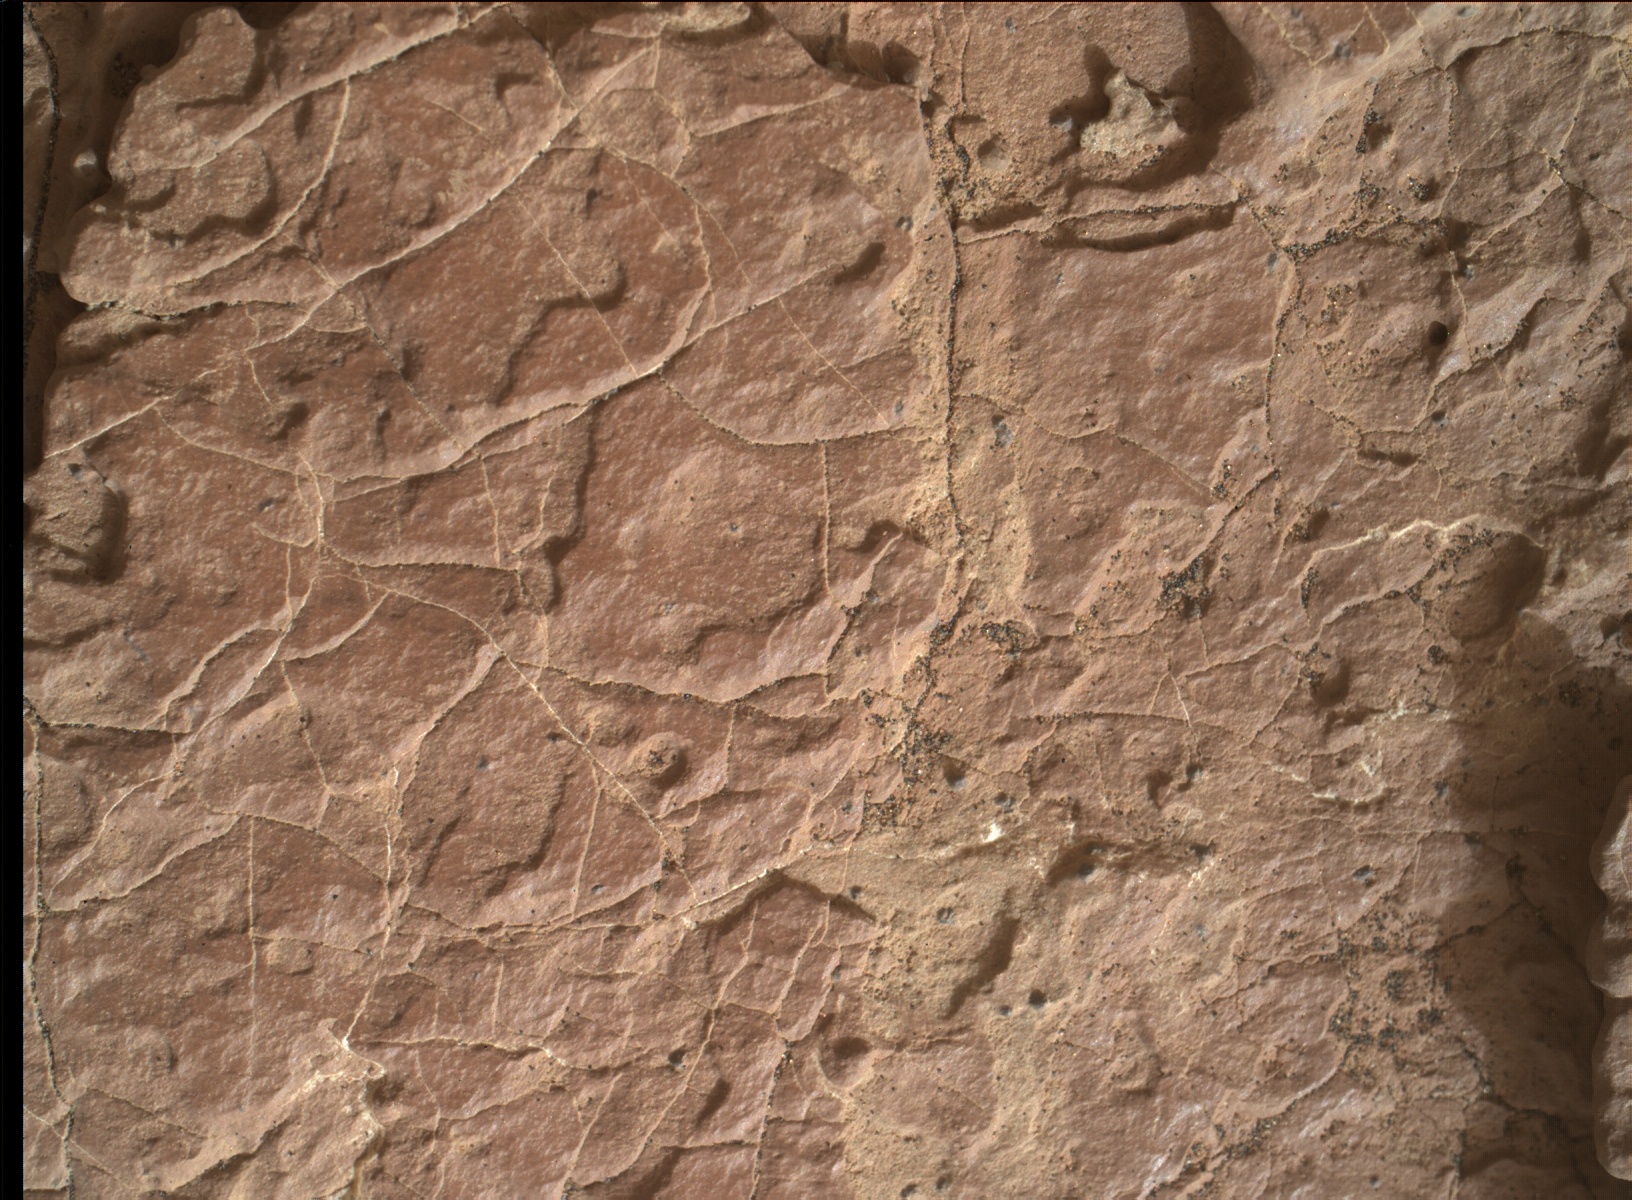 Nasa's Mars rover Curiosity acquired this image using its Mars Hand Lens Imager (MAHLI) on Sol 1634